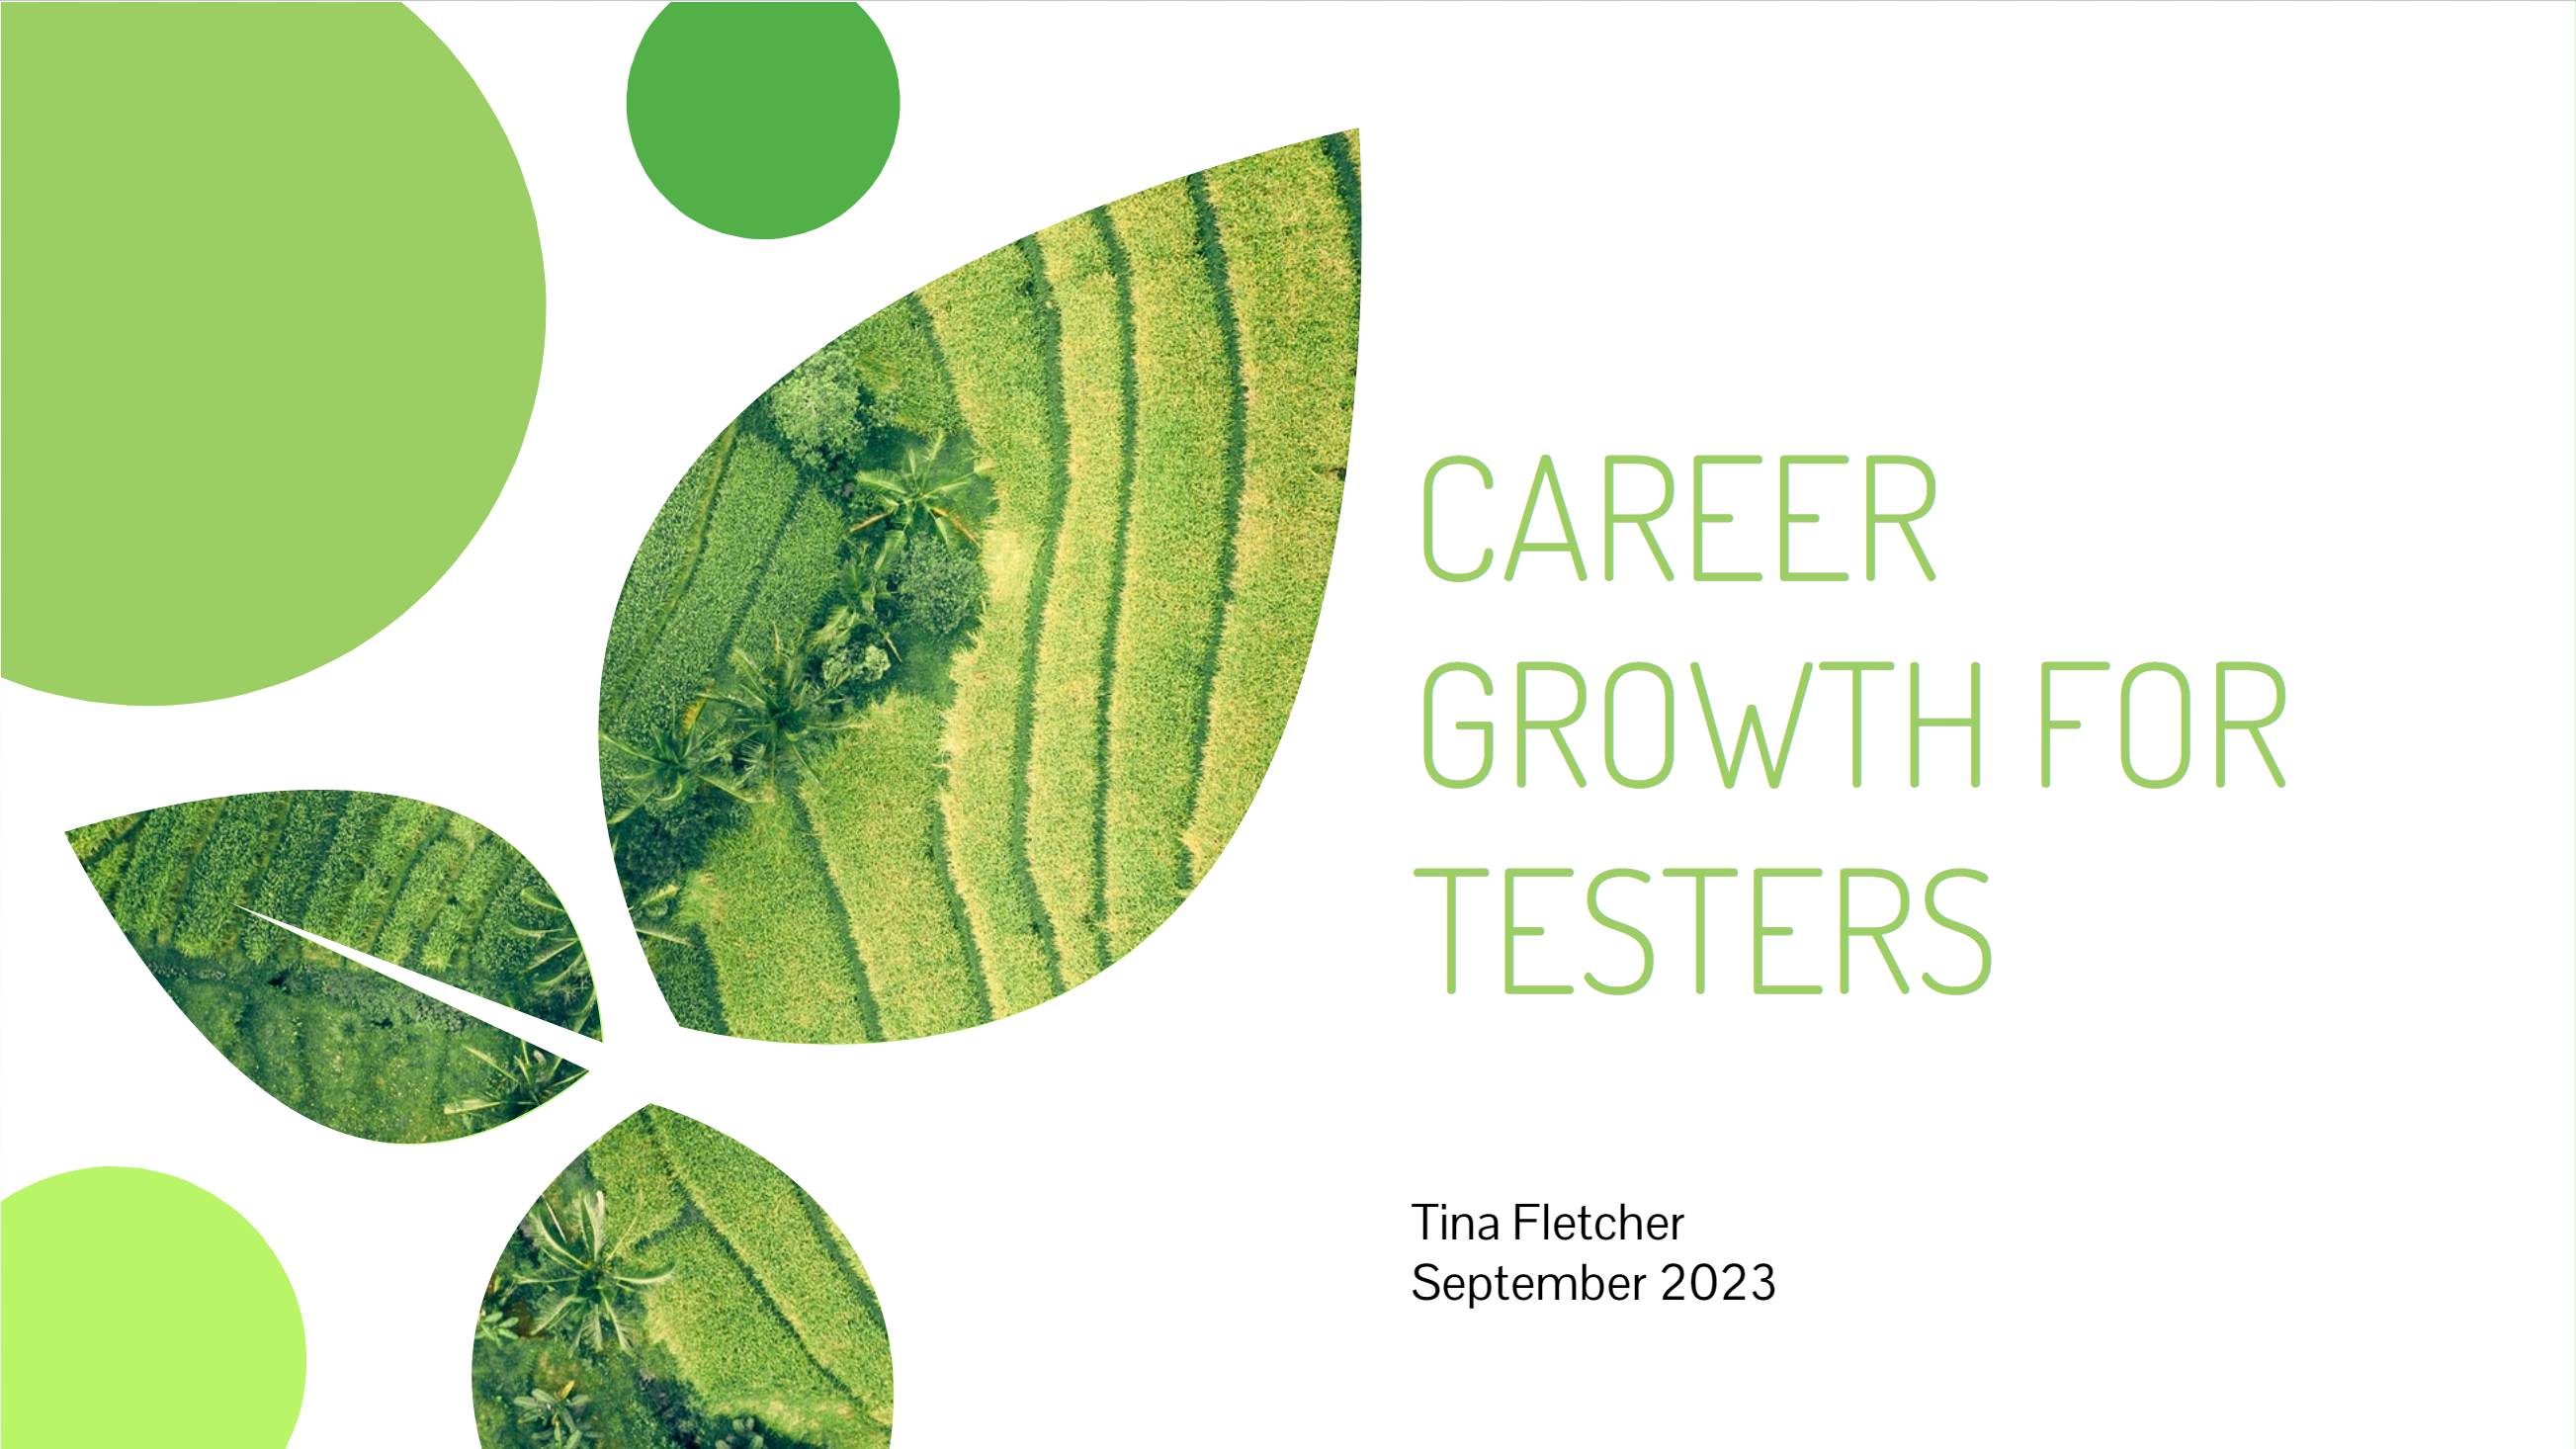 Thumbnail image of a slide that says "Career Growth for Testers"